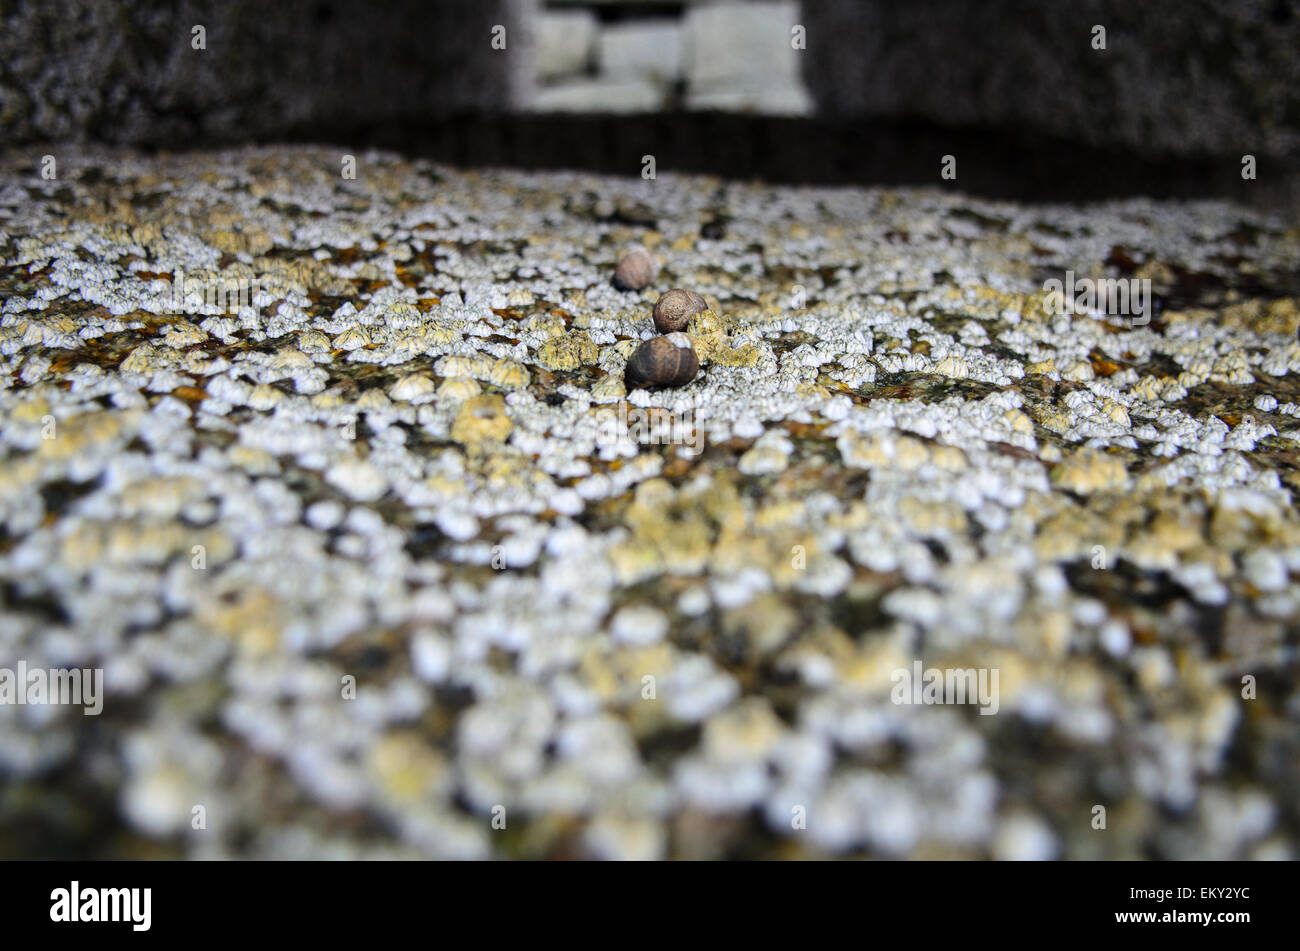 Close-up view of Common Periwinkle and Northern Rock Barnacles on a granite pier, Maine. Stock Photo